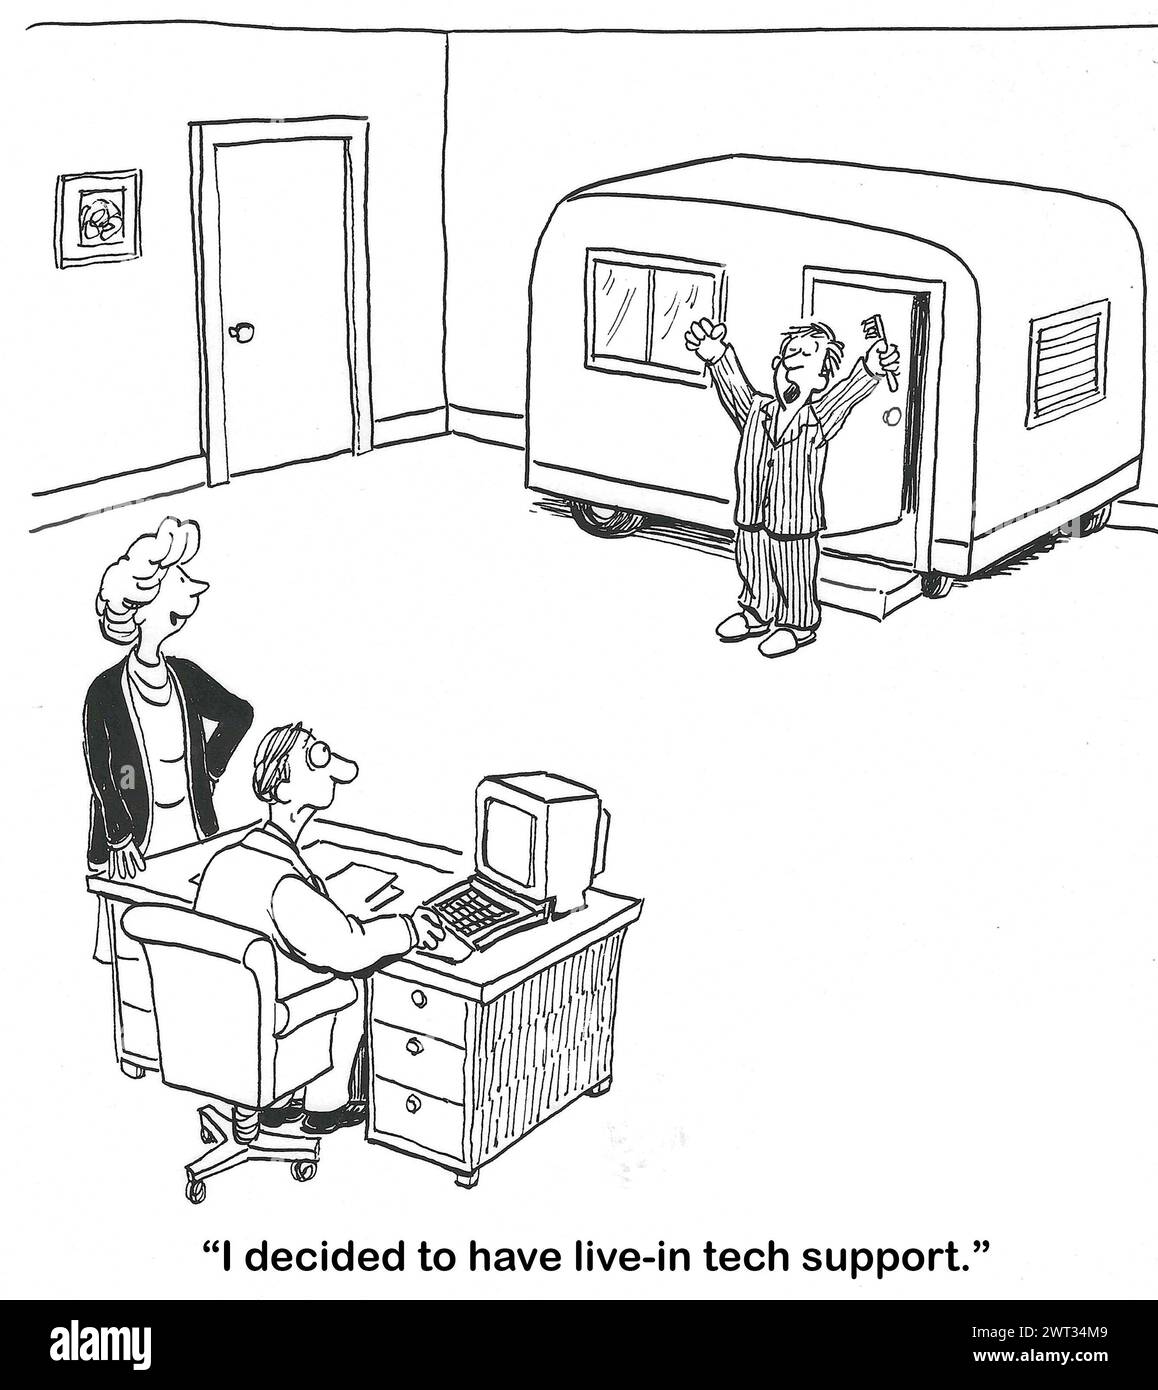 BW cartoon of a business couple who have decided they need live-in tech support. Stock Photo